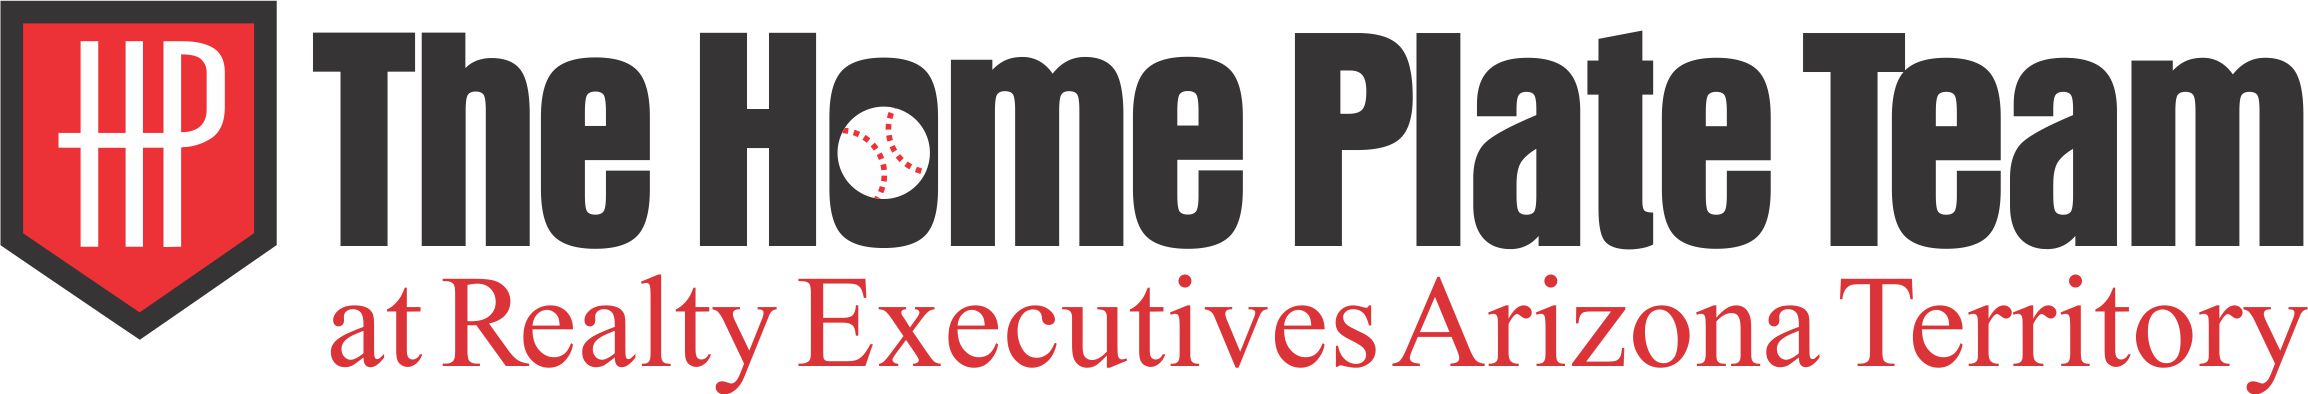 The Home Plate Team at Realty Executives